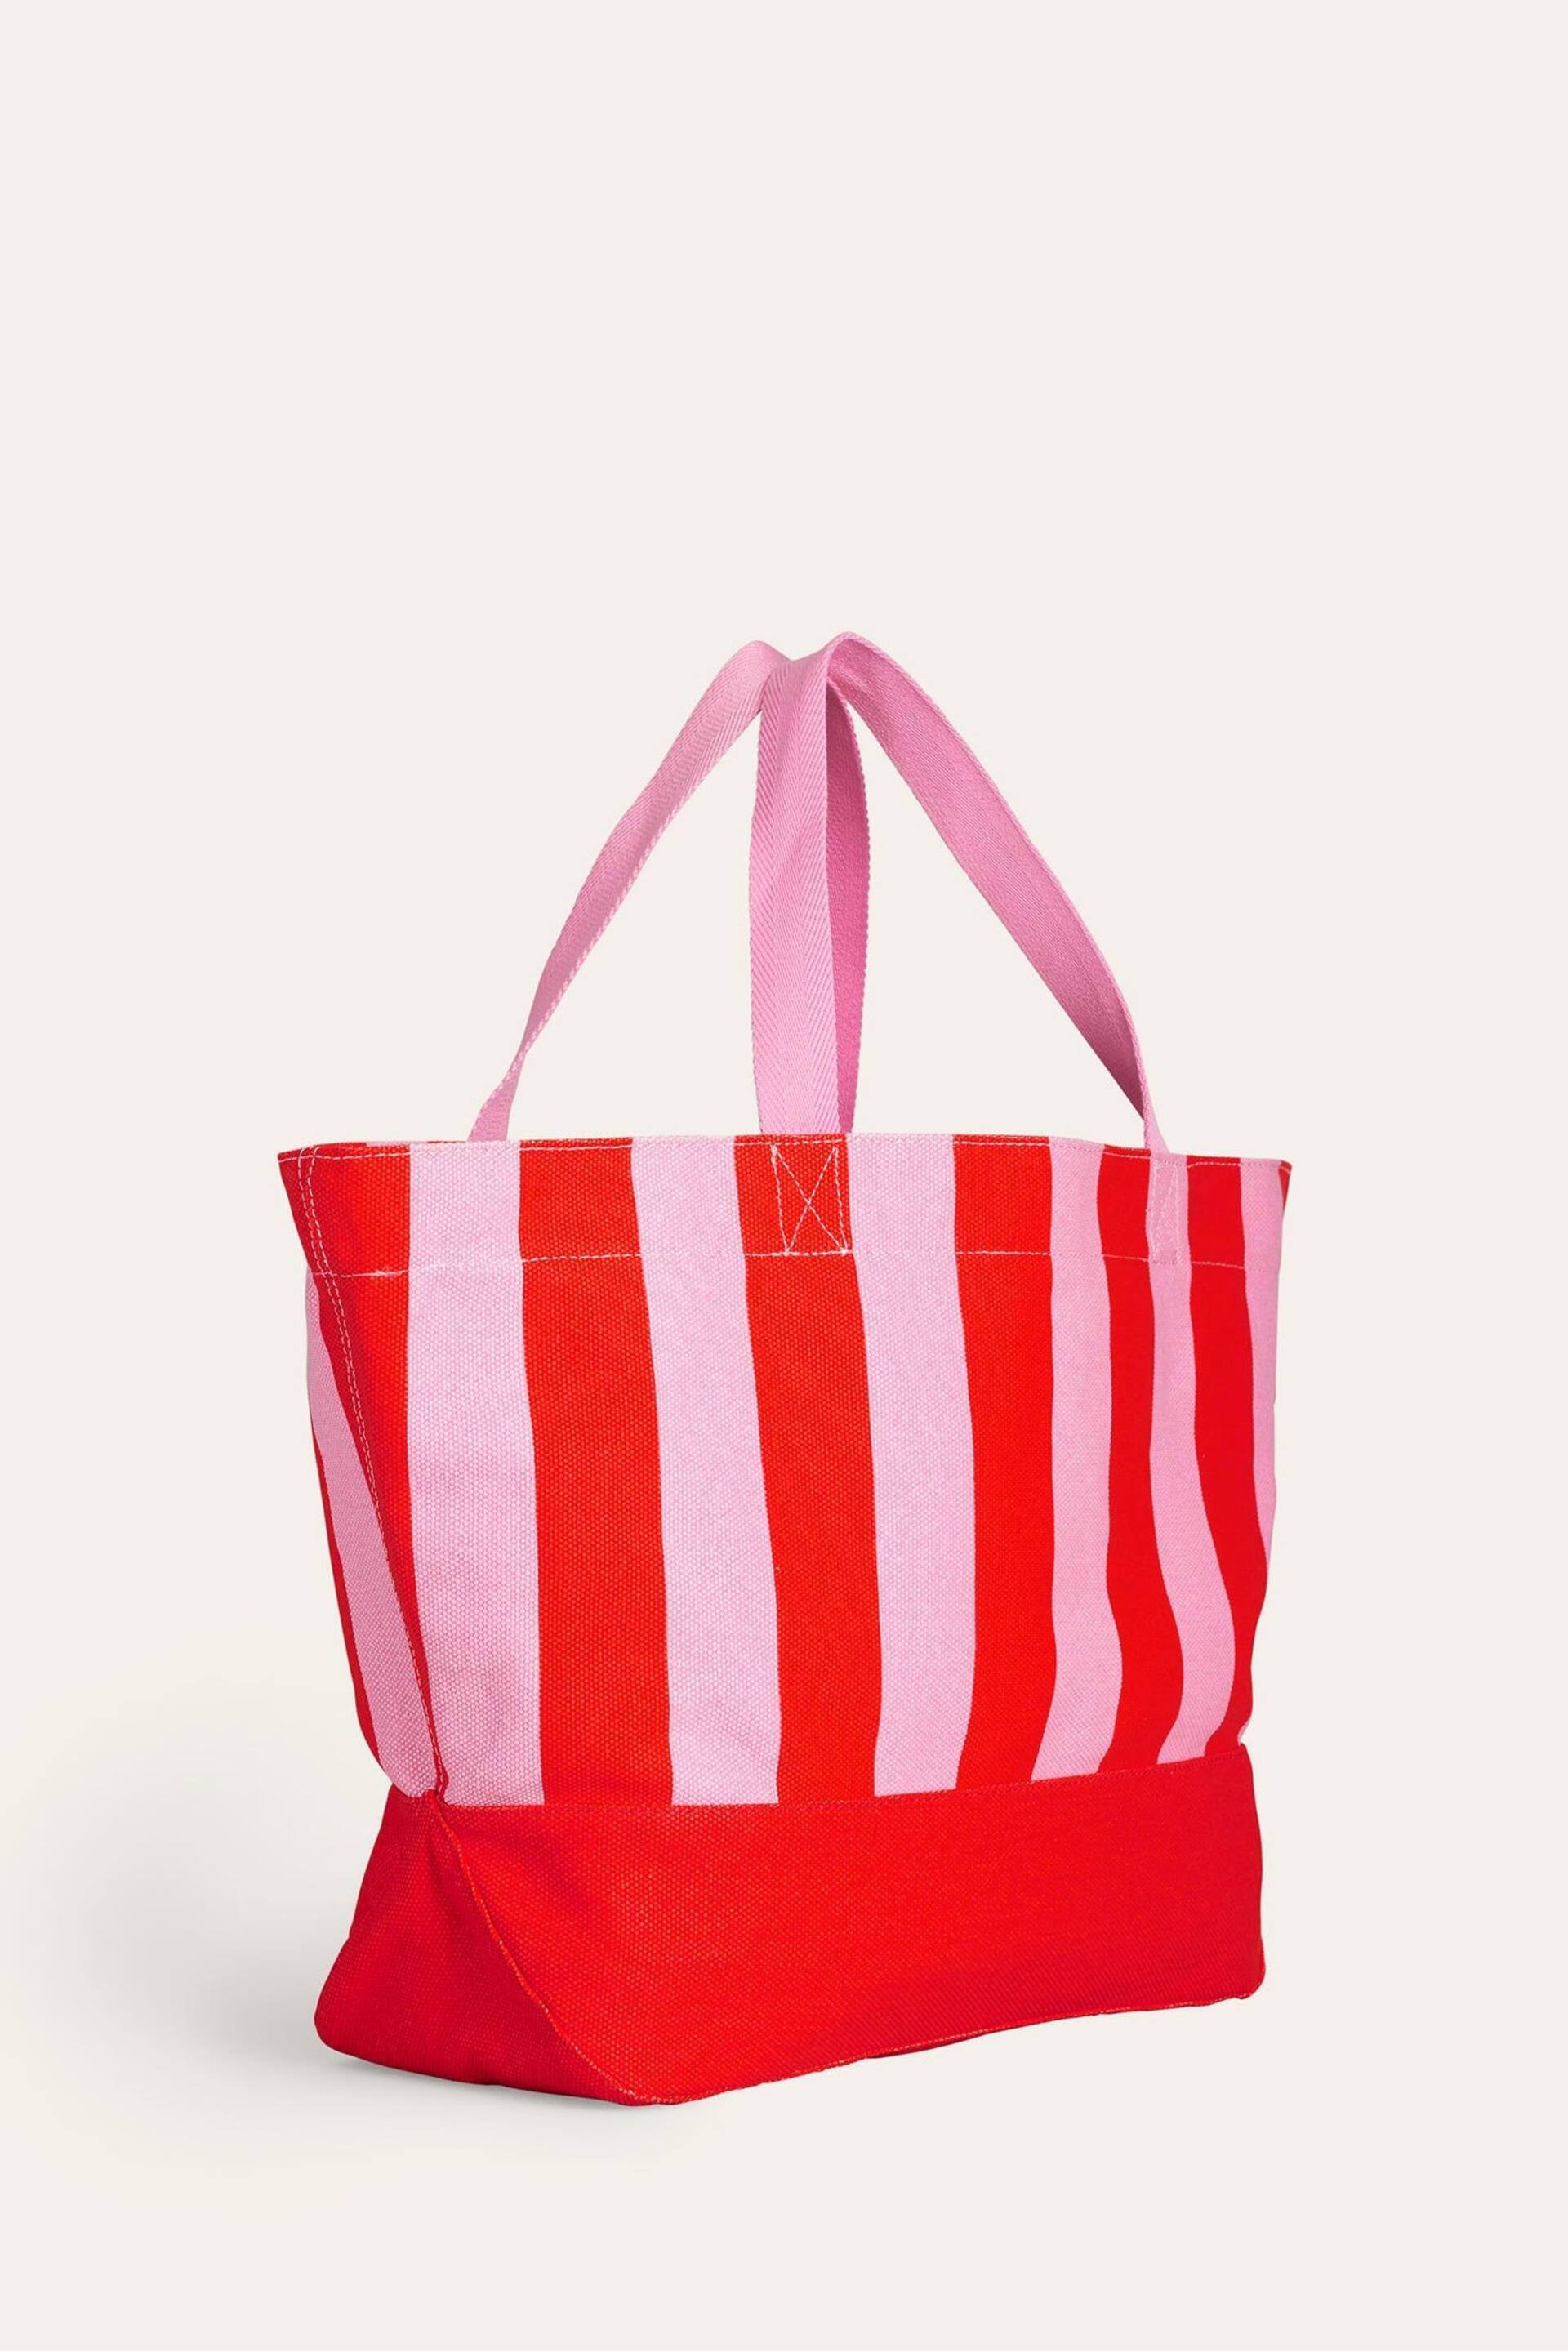 Boden Red Relaxed Canvas Tote Bag - Image 3 of 4